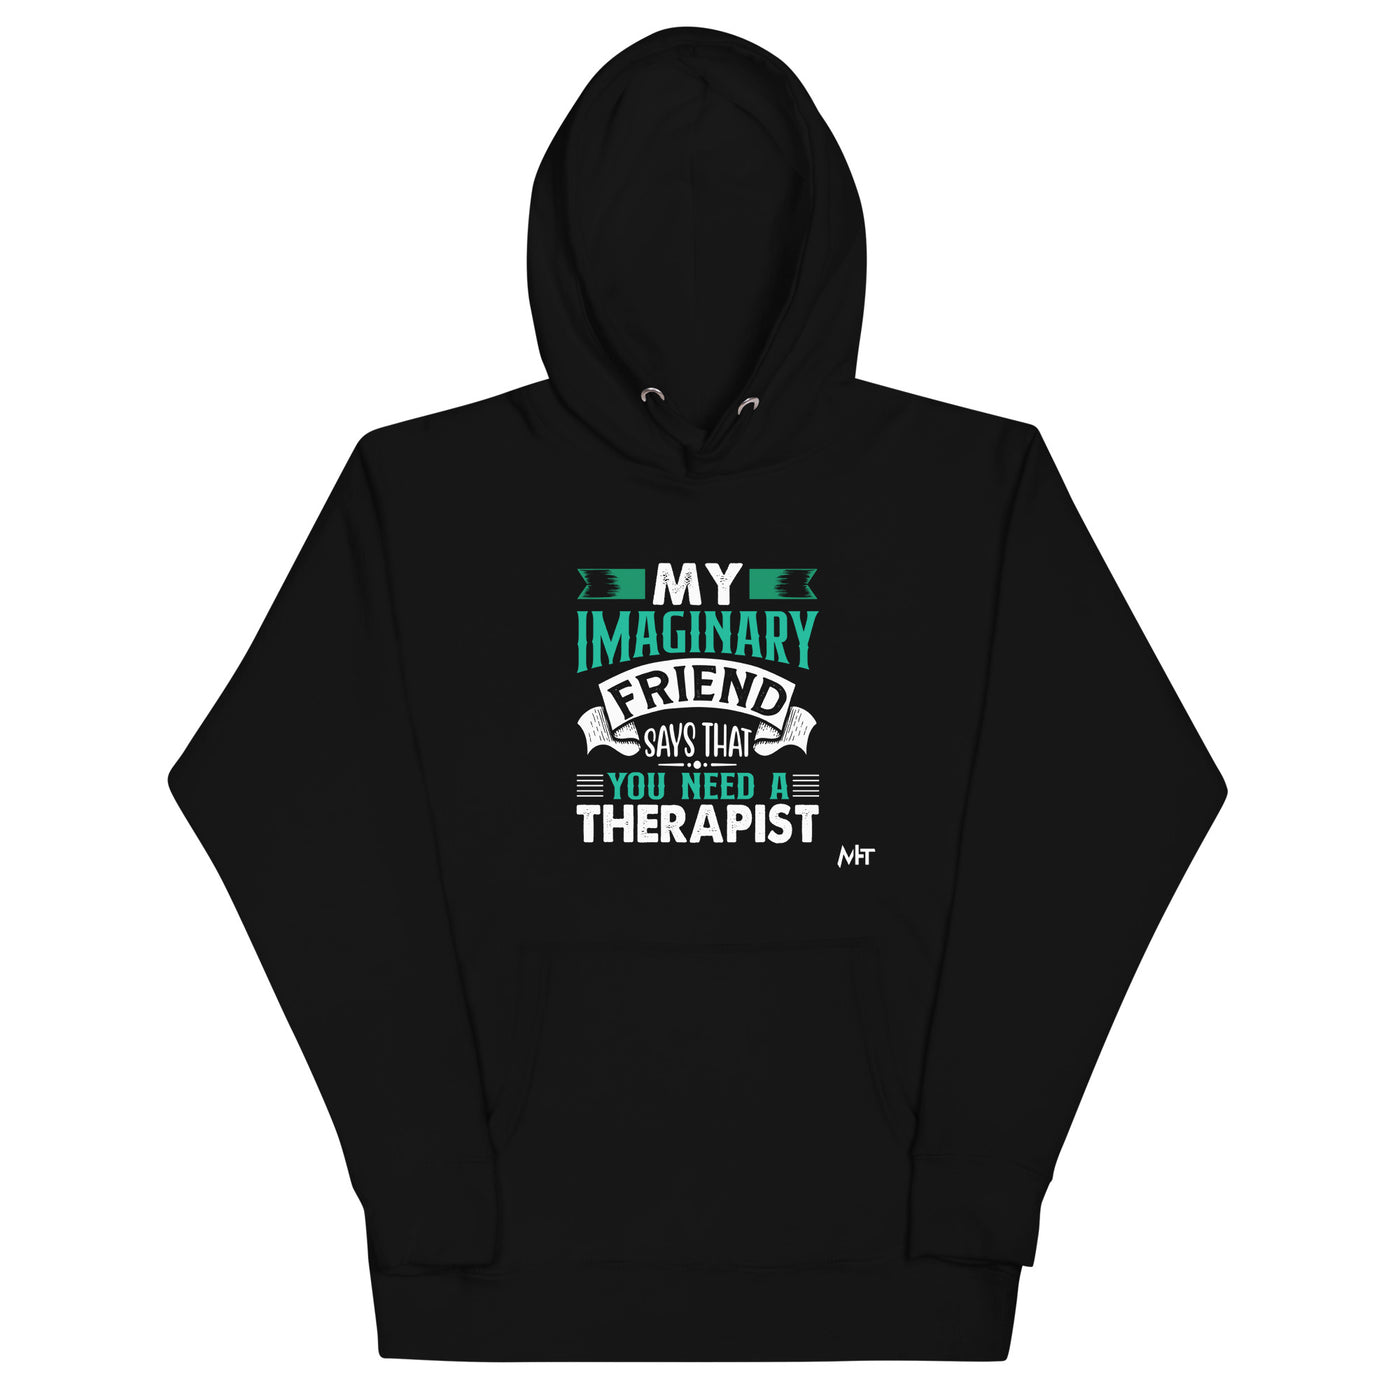 My imaginary friend Says you Need a therapist - Unisex Hoodie